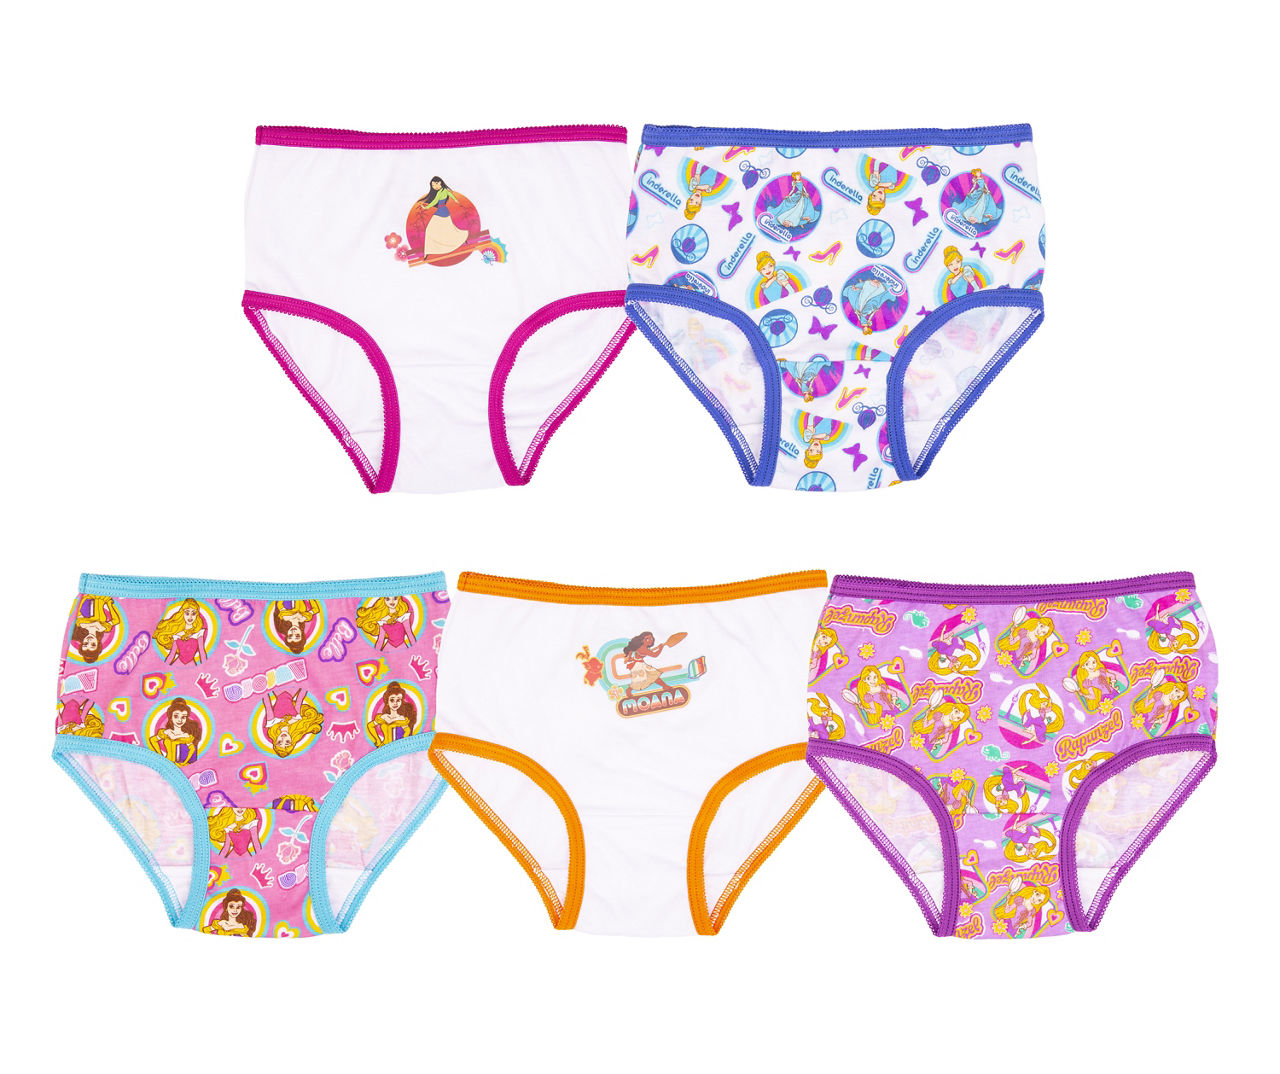 Kids' Size 6 White, Pink & Purple Briefs With Coloring Page, 5-Pack